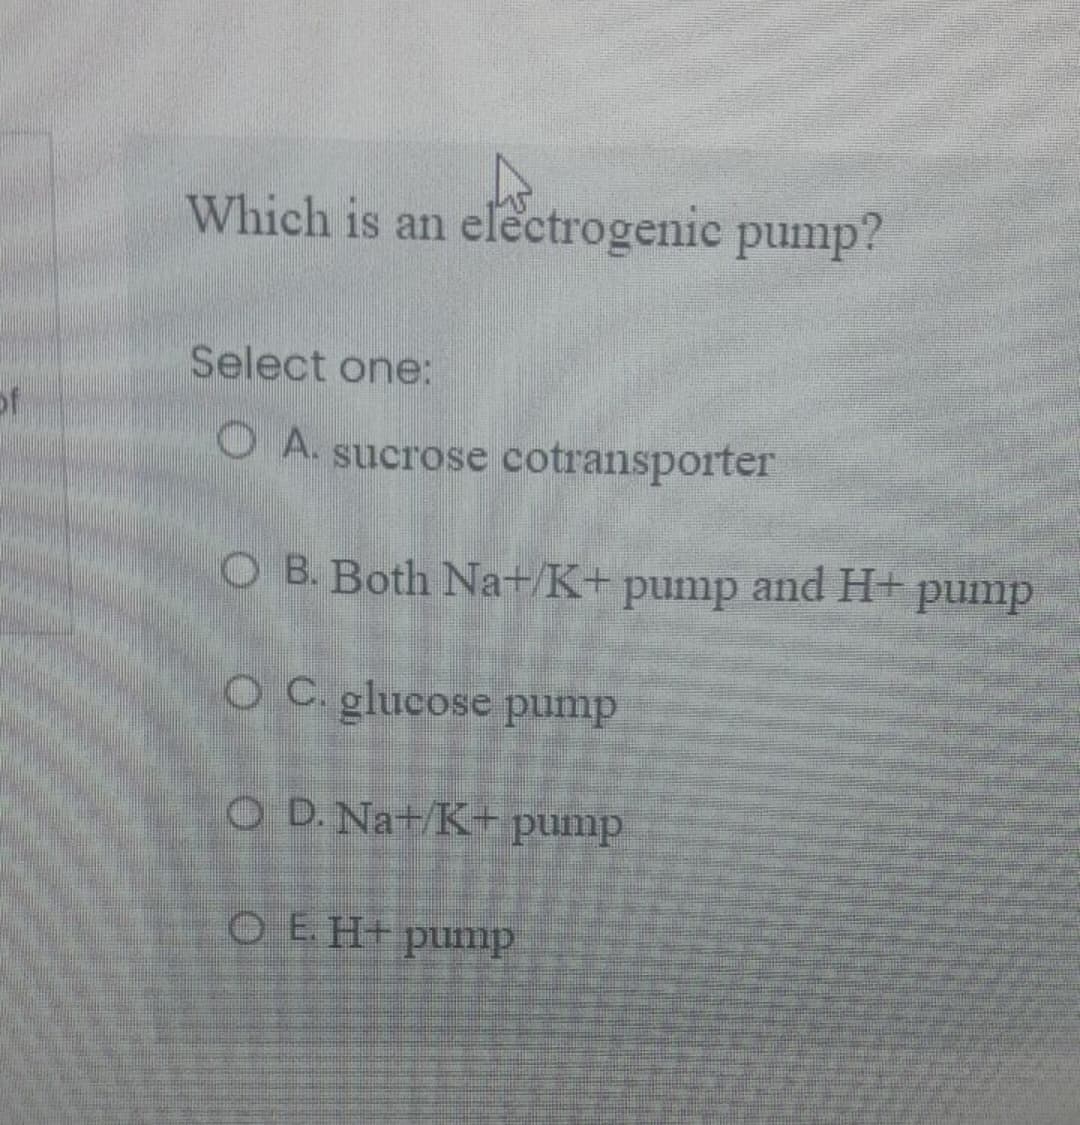 Which is an electrogenic pump?
Select one:
O A. sucrose cotransporter
O B. Both Na+/K+ pump and H+ pump
OC. glucose pump
O D.Nat/K+ pump
O E. H+ pump
